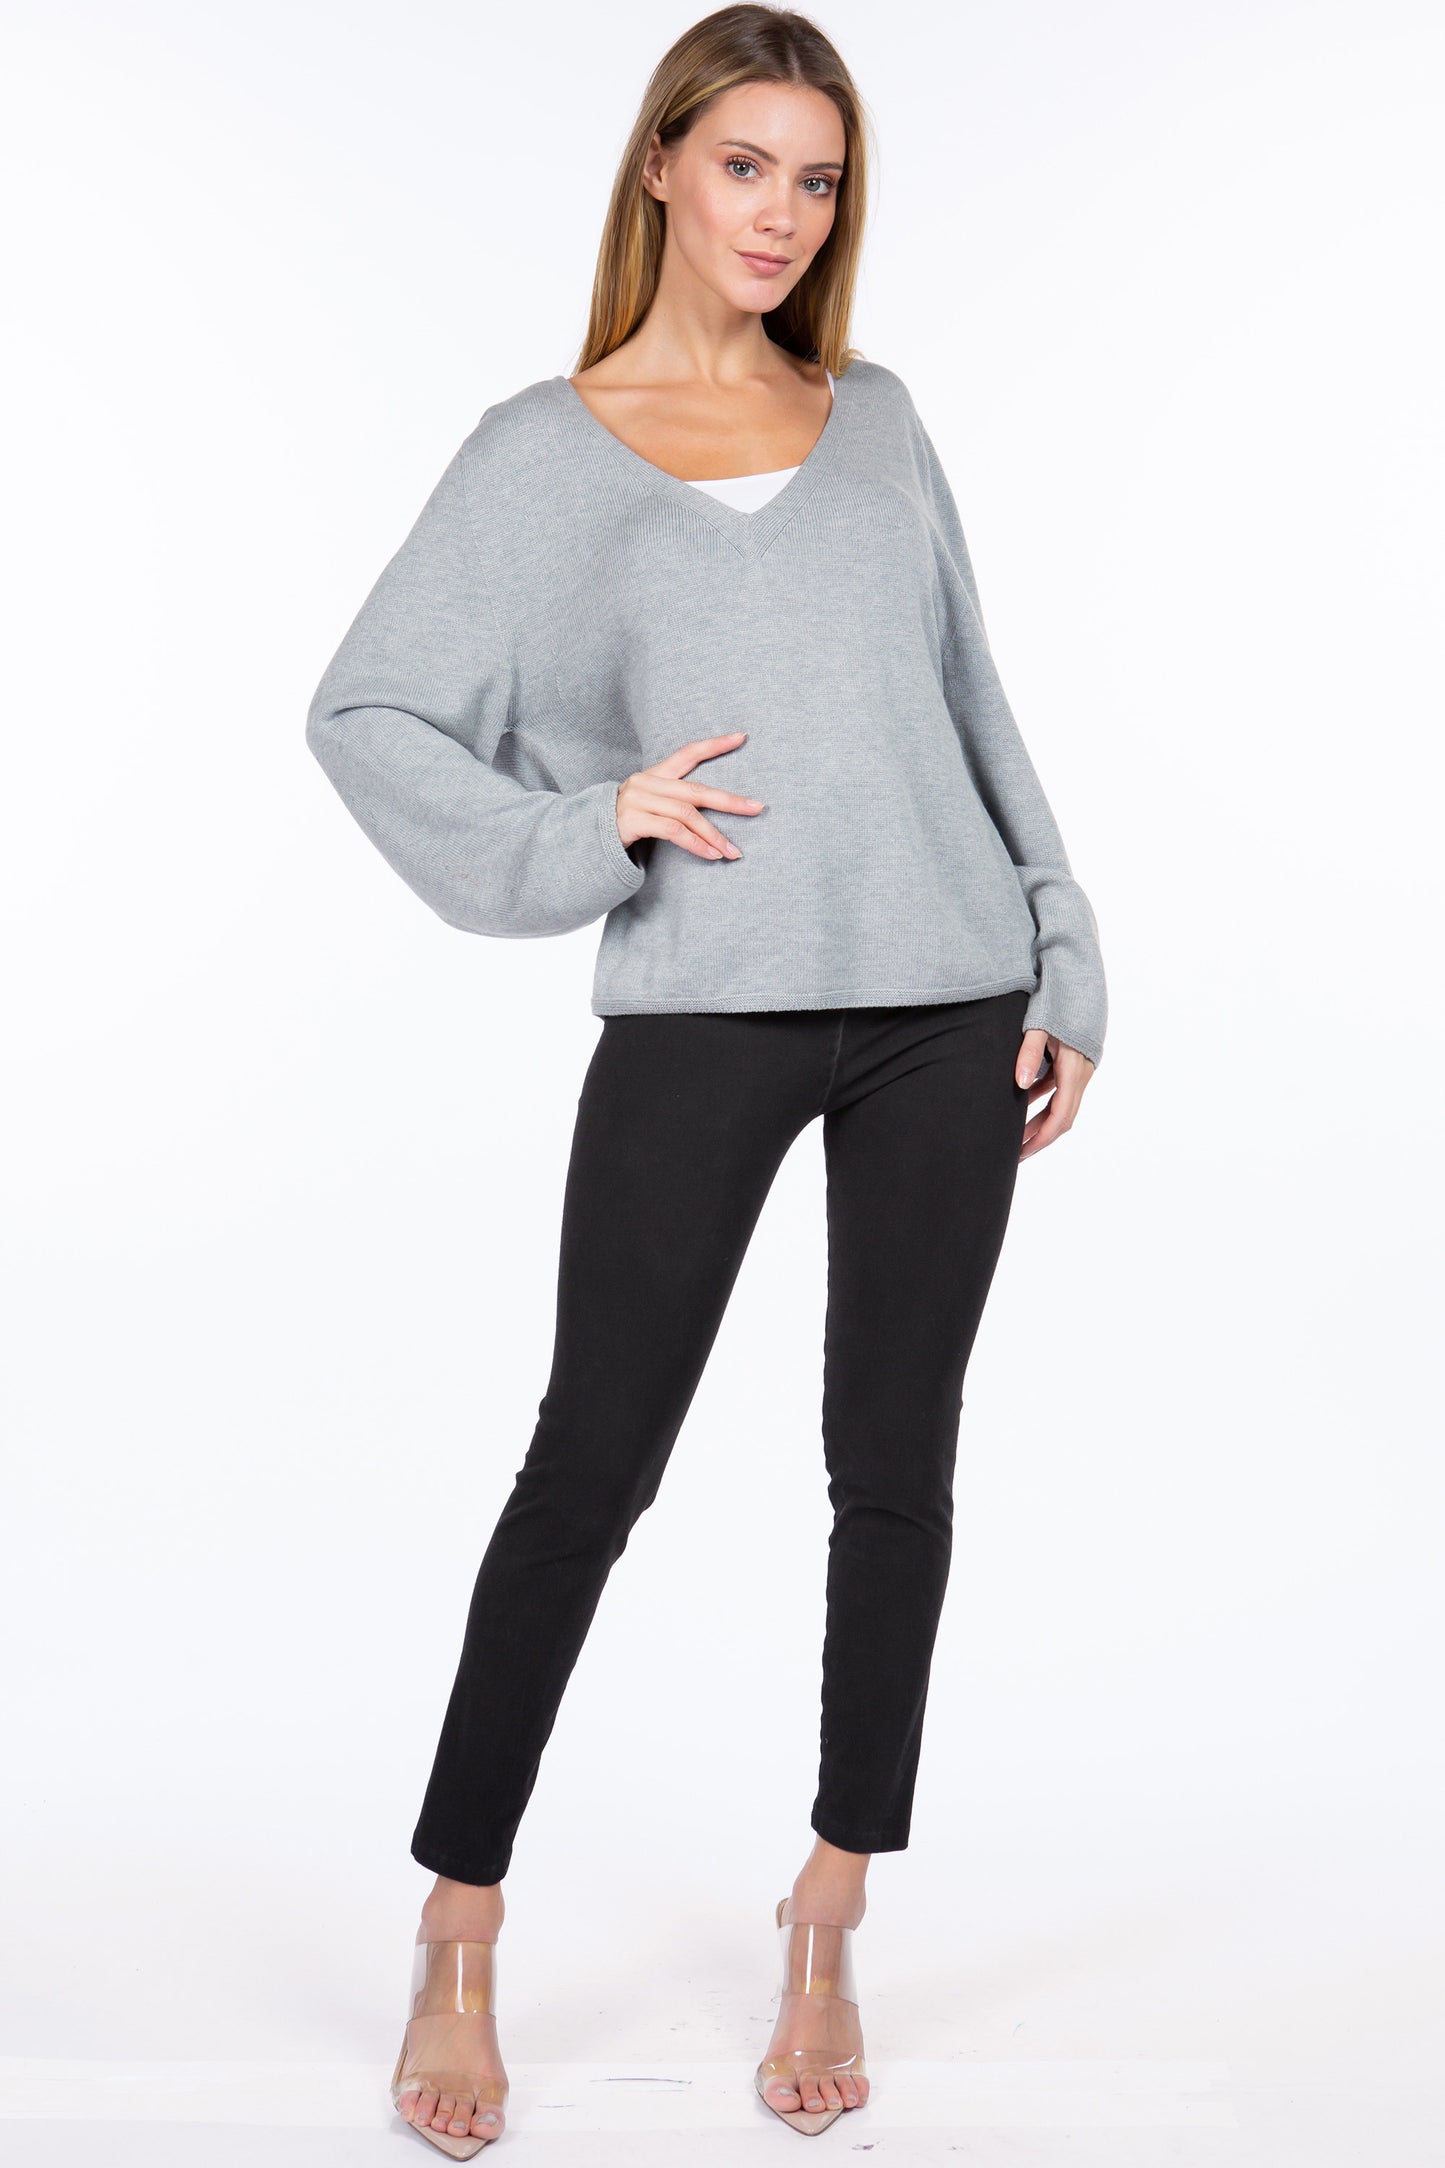 Sustainable Relaxed Fit Classic V-Neck Sweater